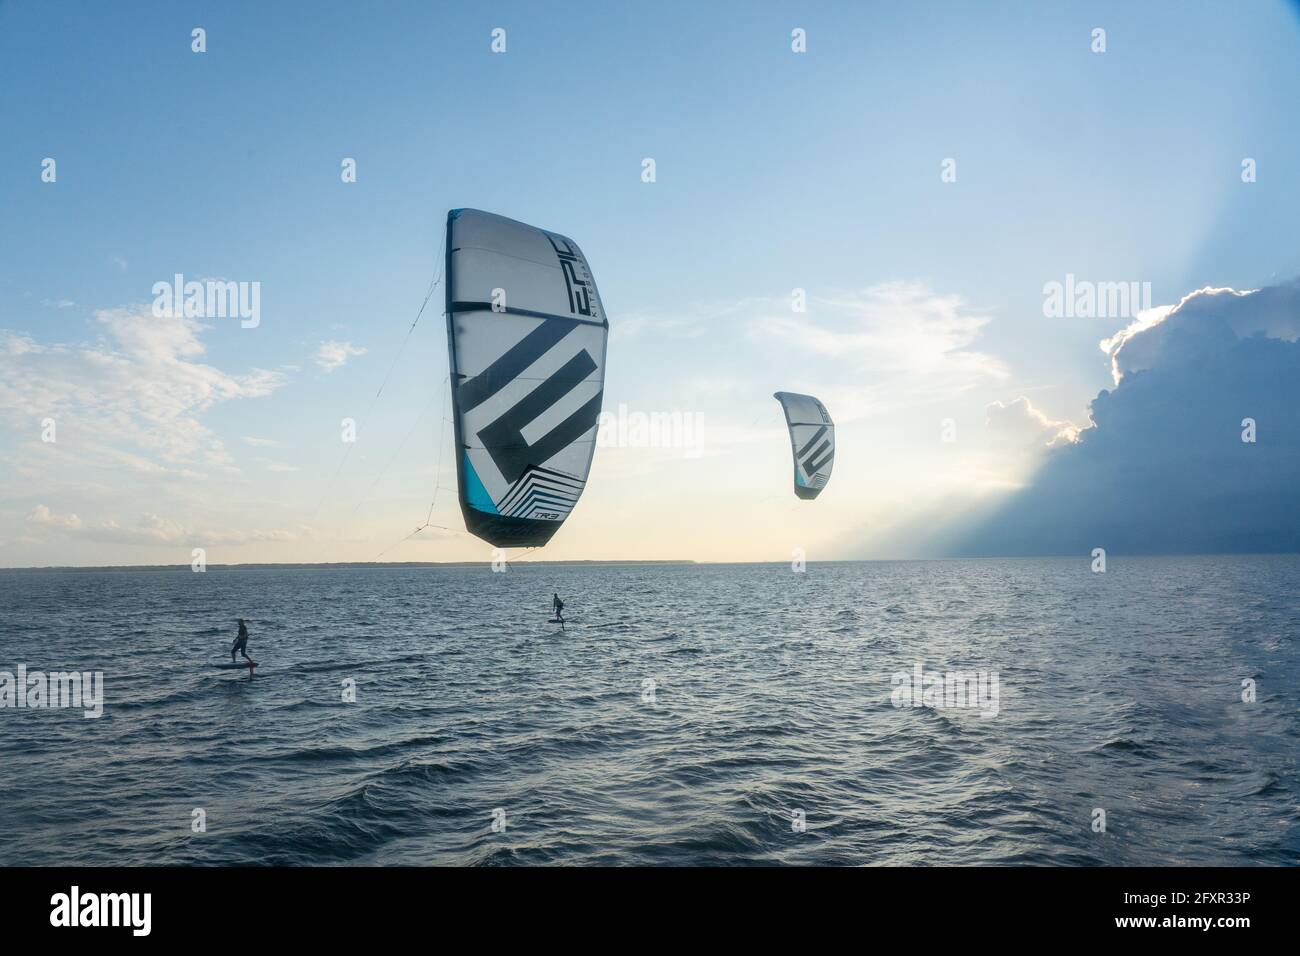 Foiling kiteboarders on the Pamlico Sound, Nags Head, North Carolina, United States of America, North America Stock Photo